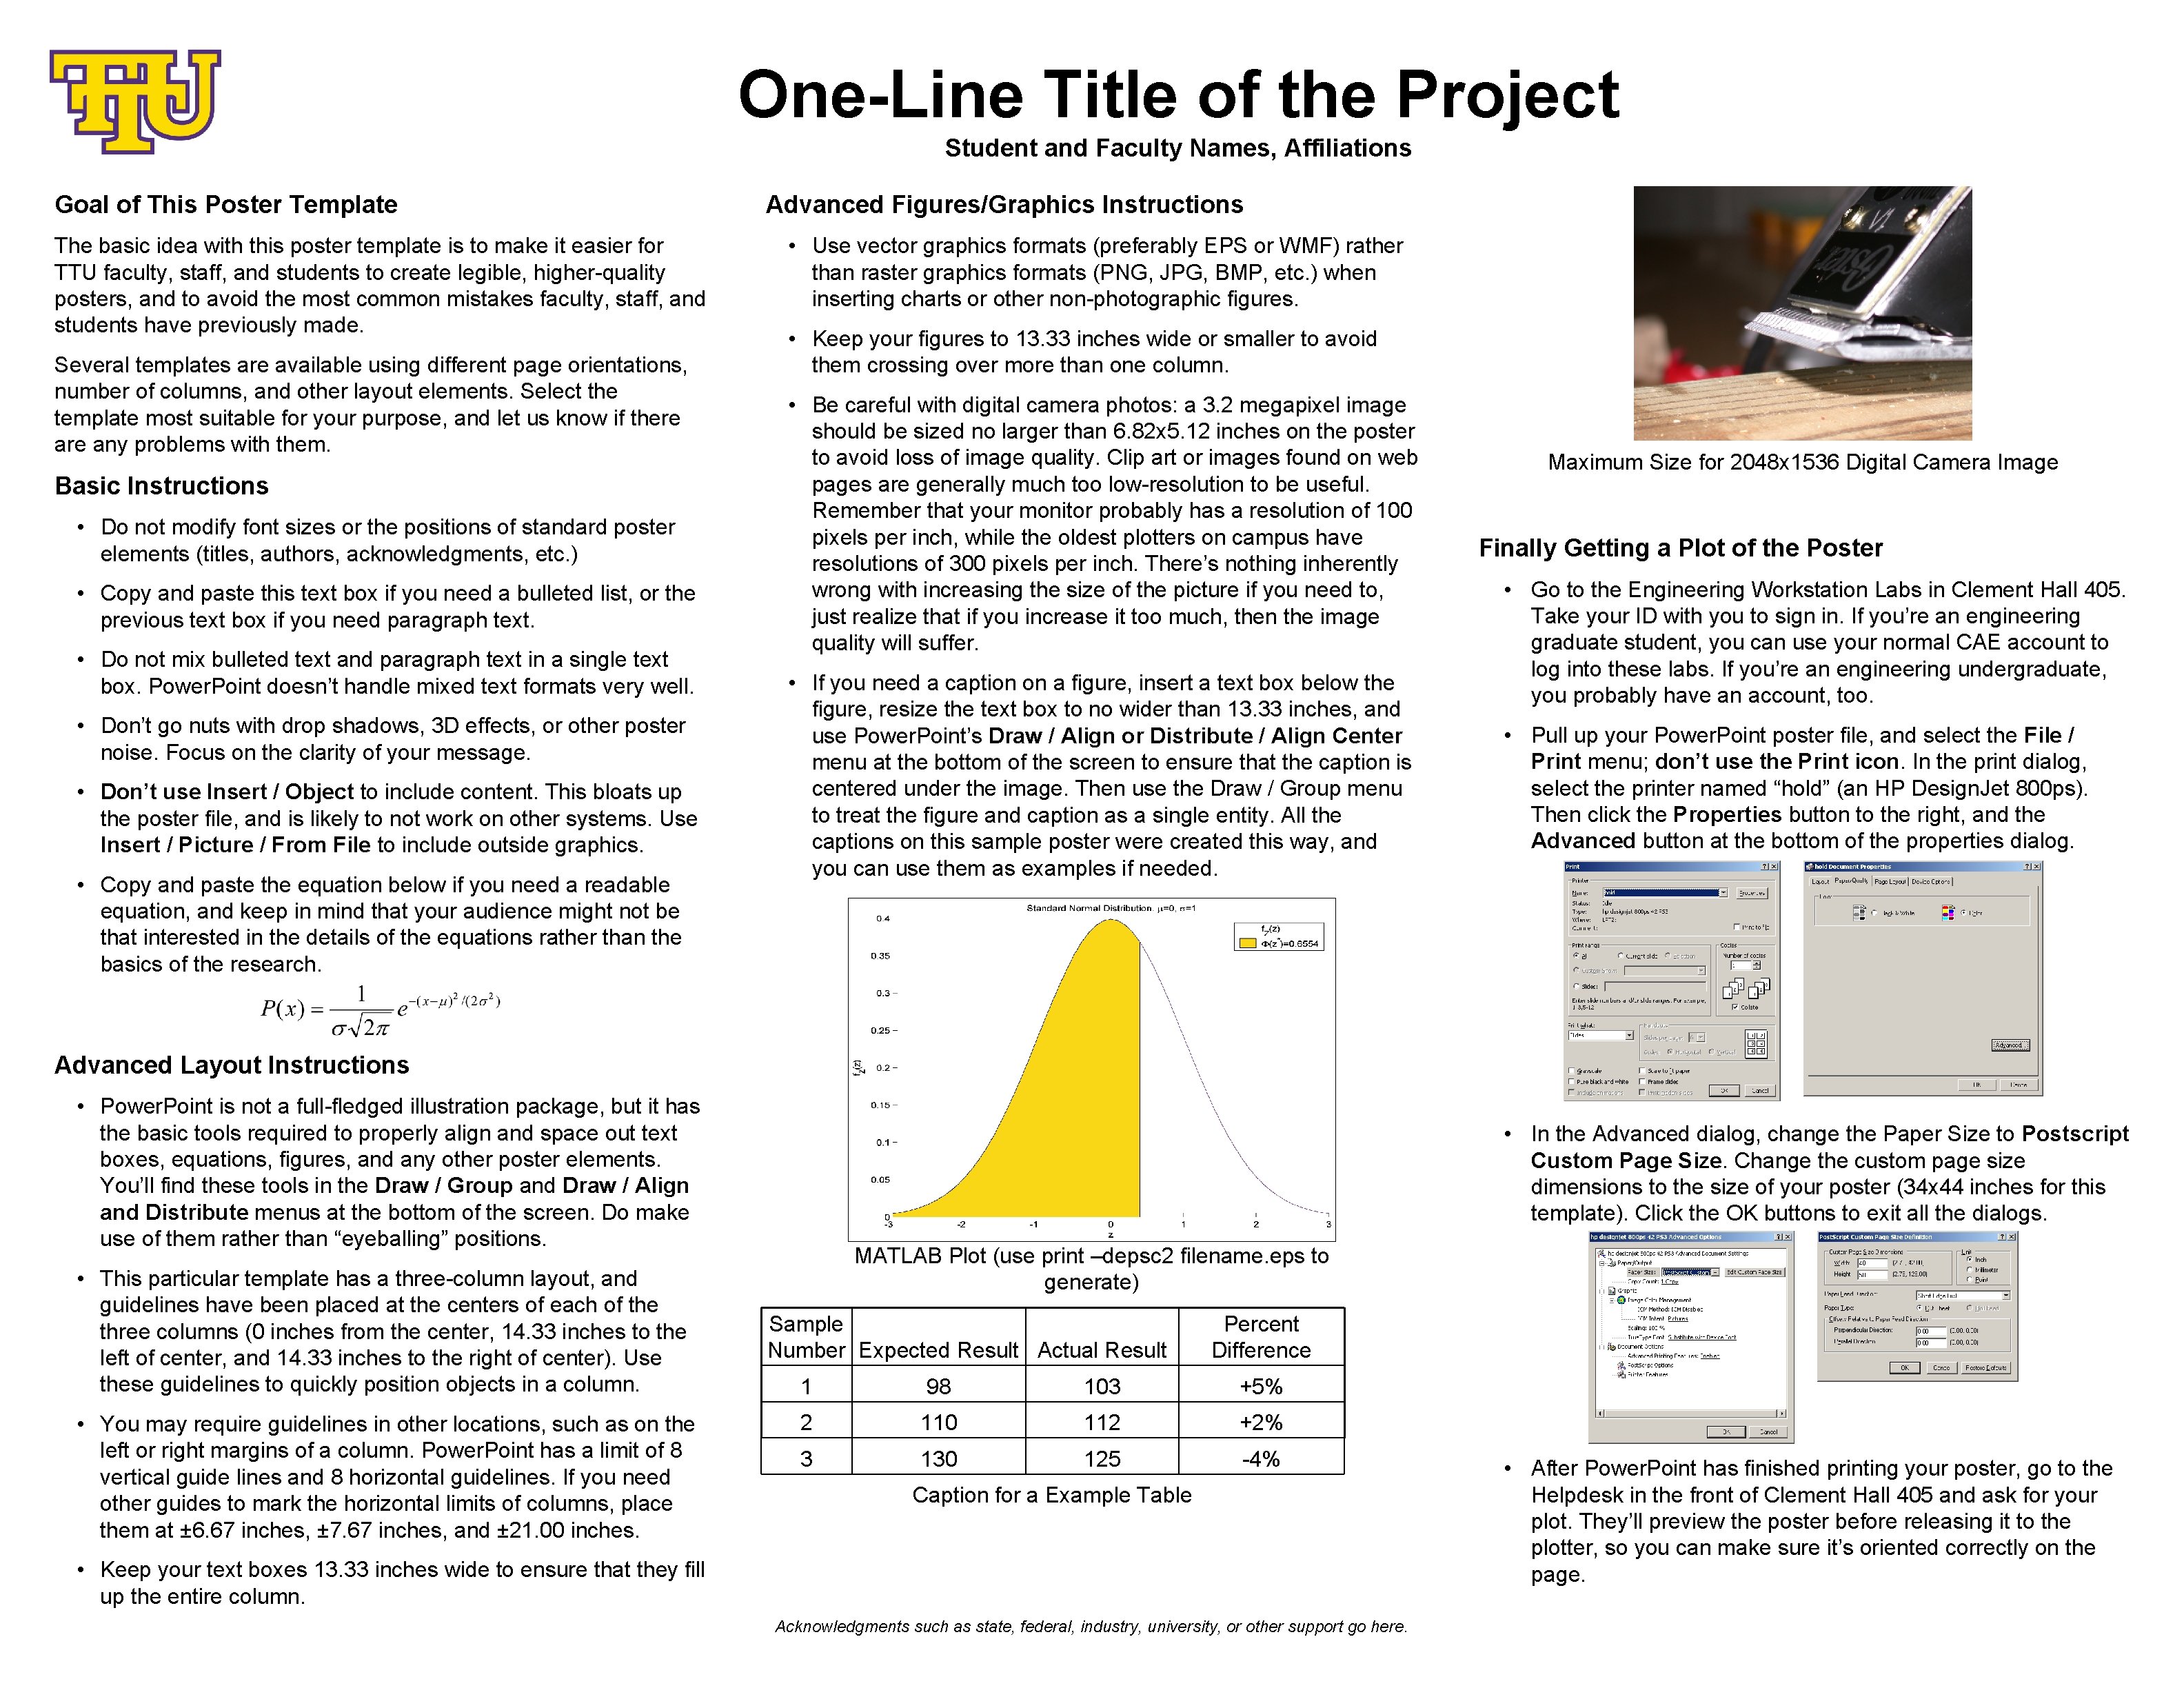 One-Line Title of the Project Student and Faculty Names, Affiliations Goal of This Poster